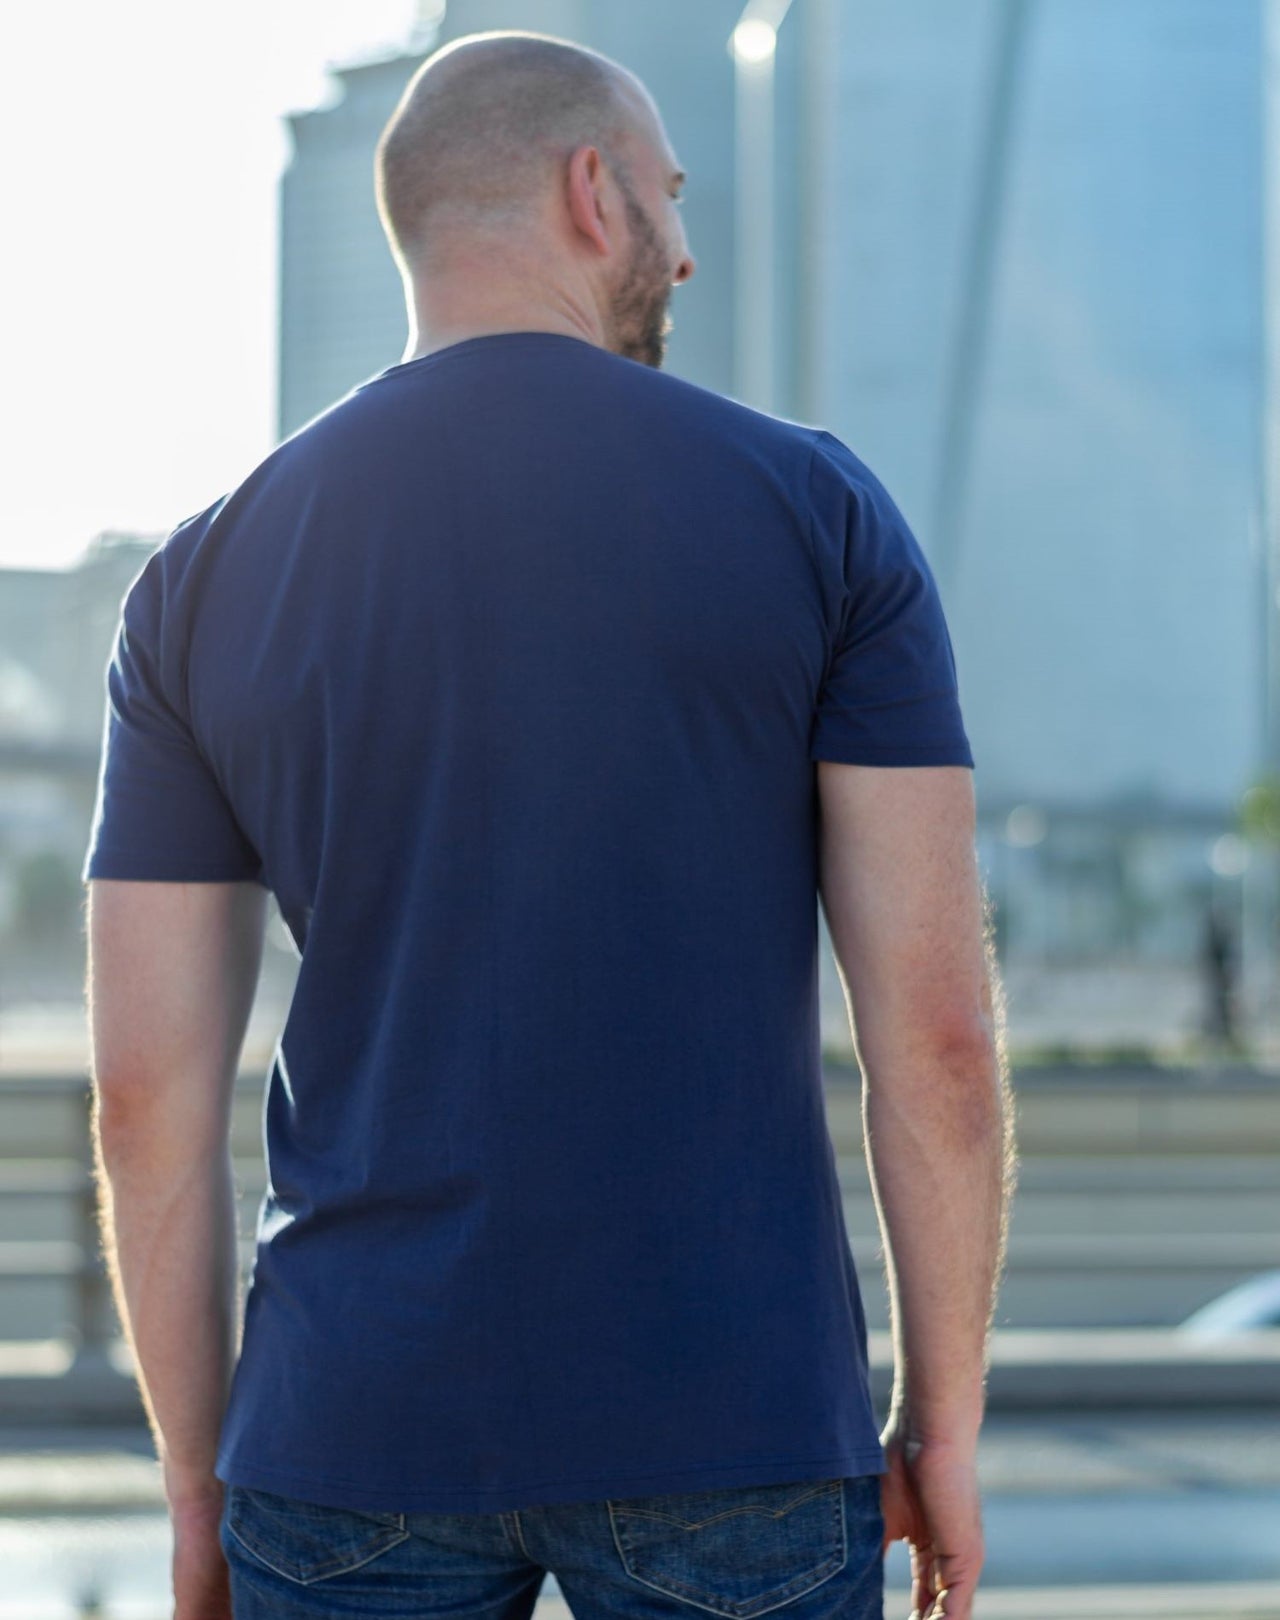 A shot from behind of a tall slim guy in the street and wearing a navy blue tall slim fit t-shirt.